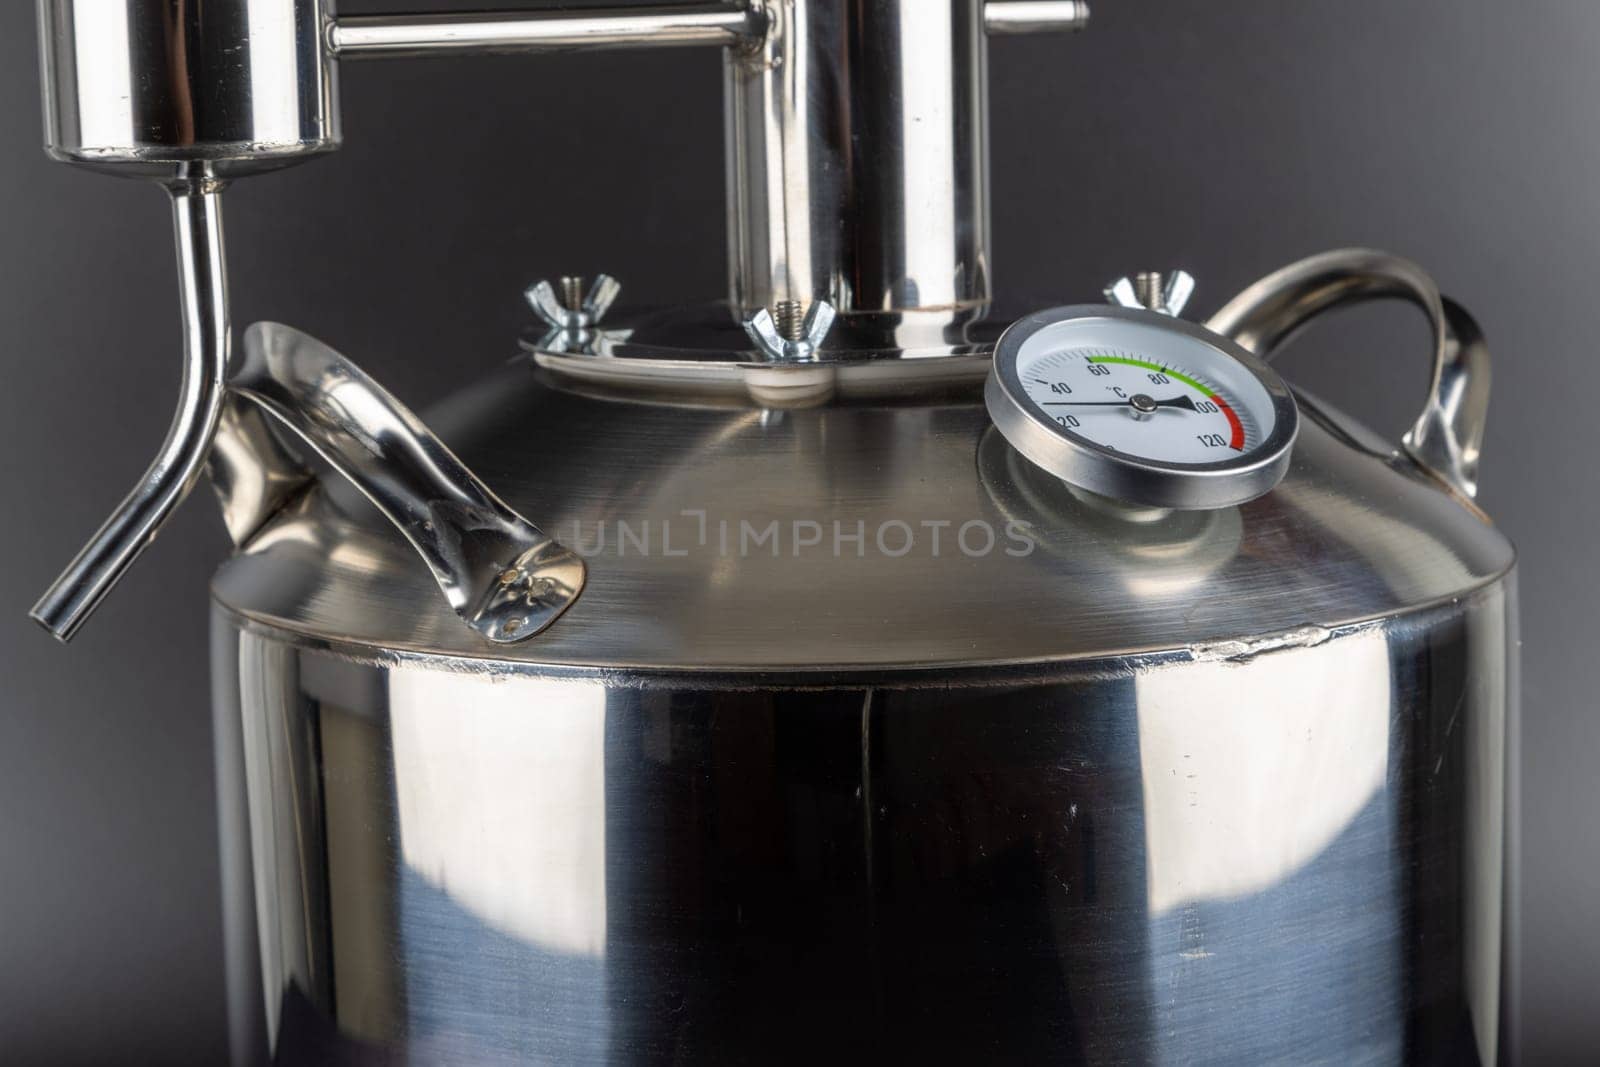 brand new stainless steel alcohol machine on black background by z1b